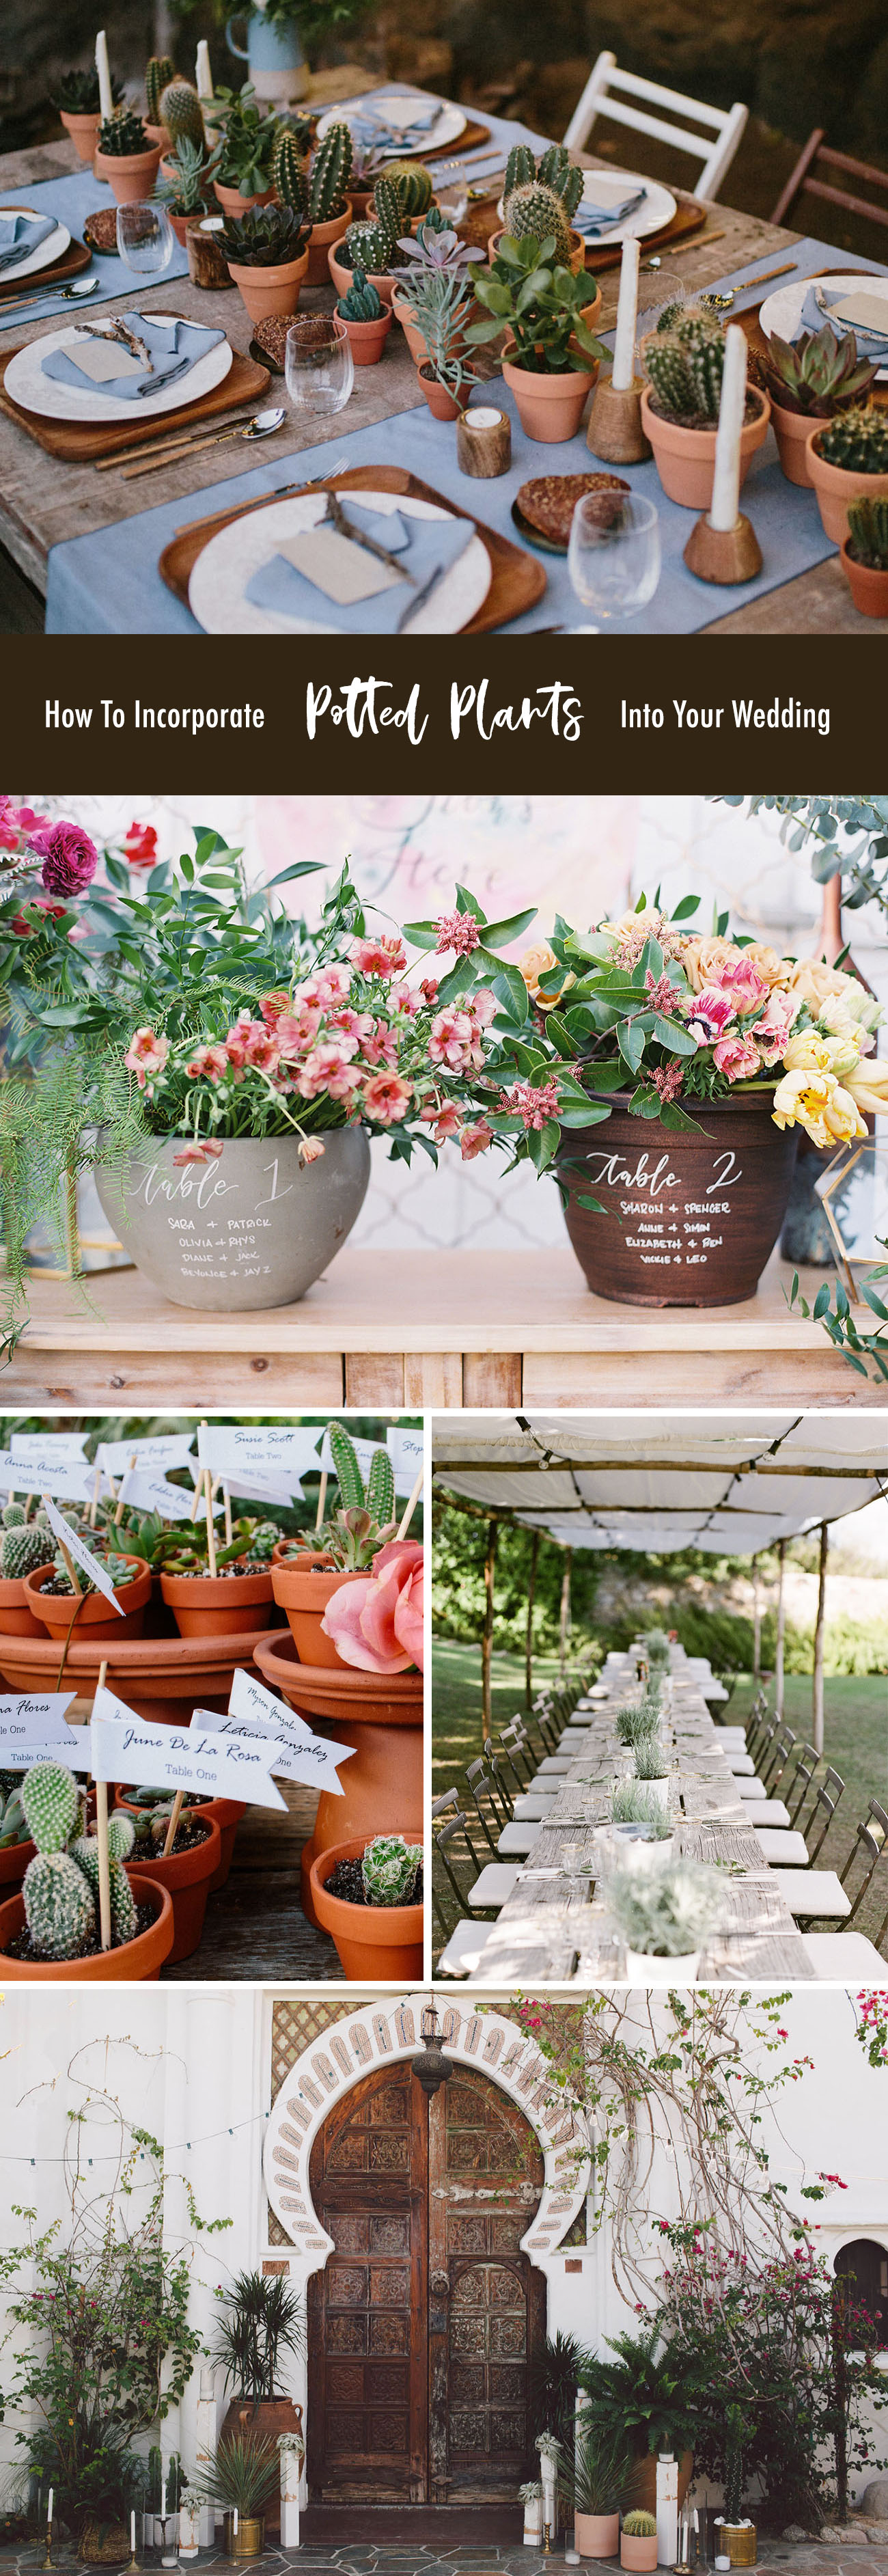 How To Incorporate Potted Plants in Your Wedding